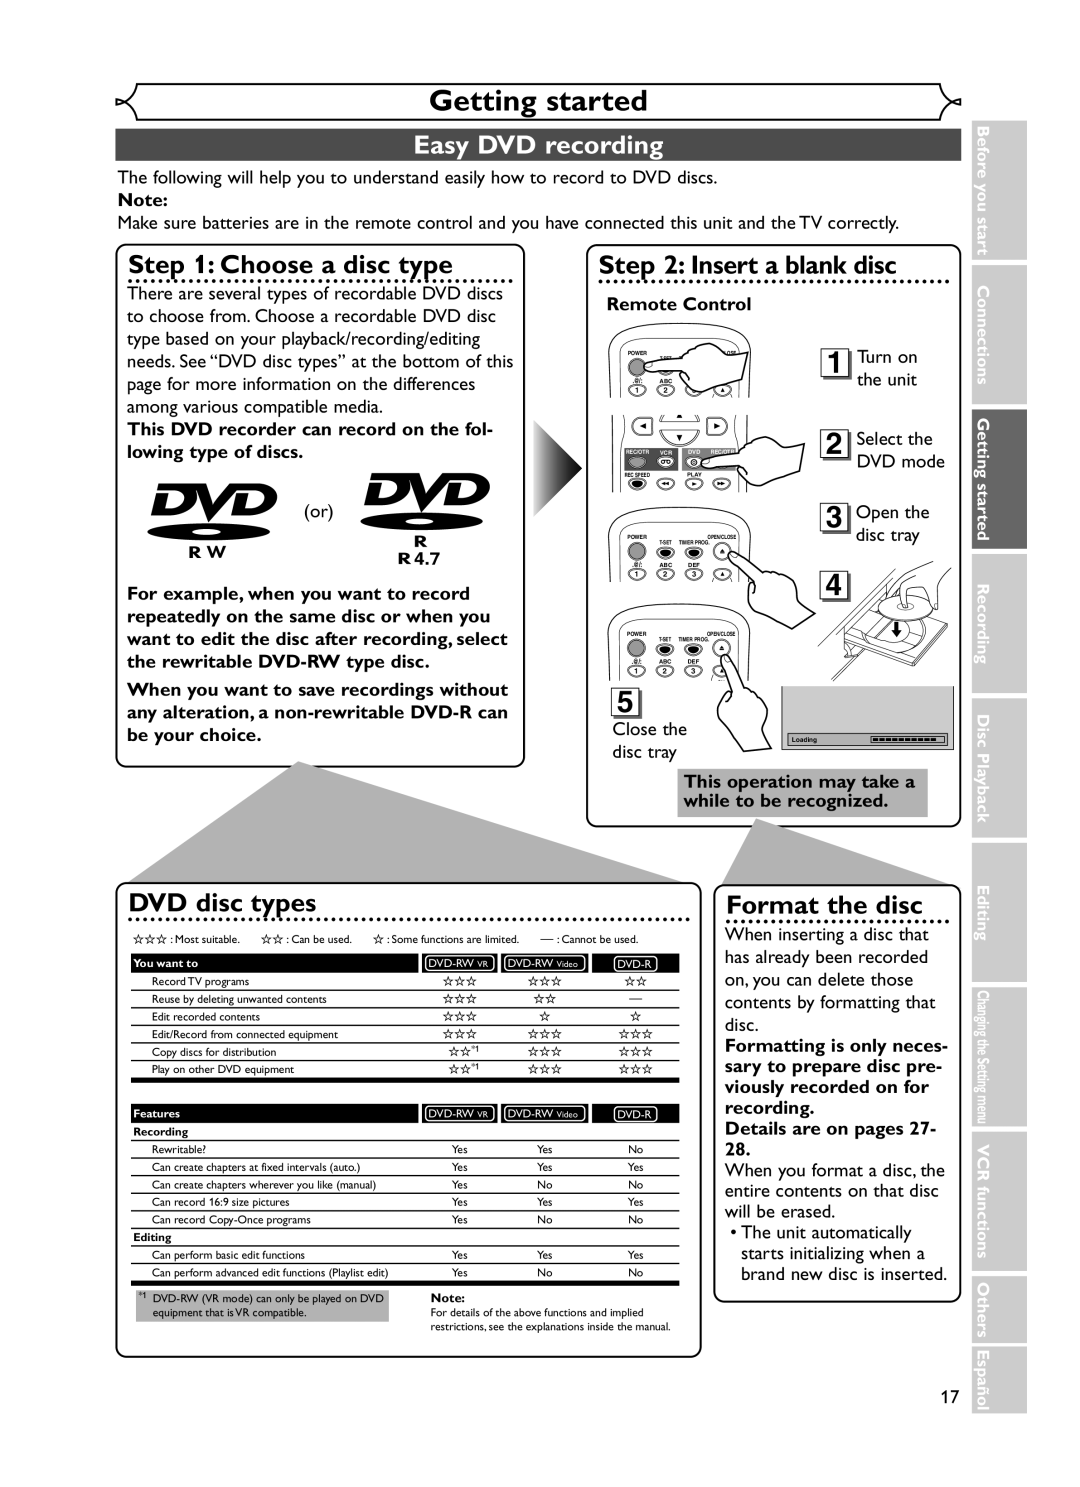 Emerson EWR20V5 owner manual Getting started, This DVD recorder can record on the fol- lowing type of discs, Remote Control 